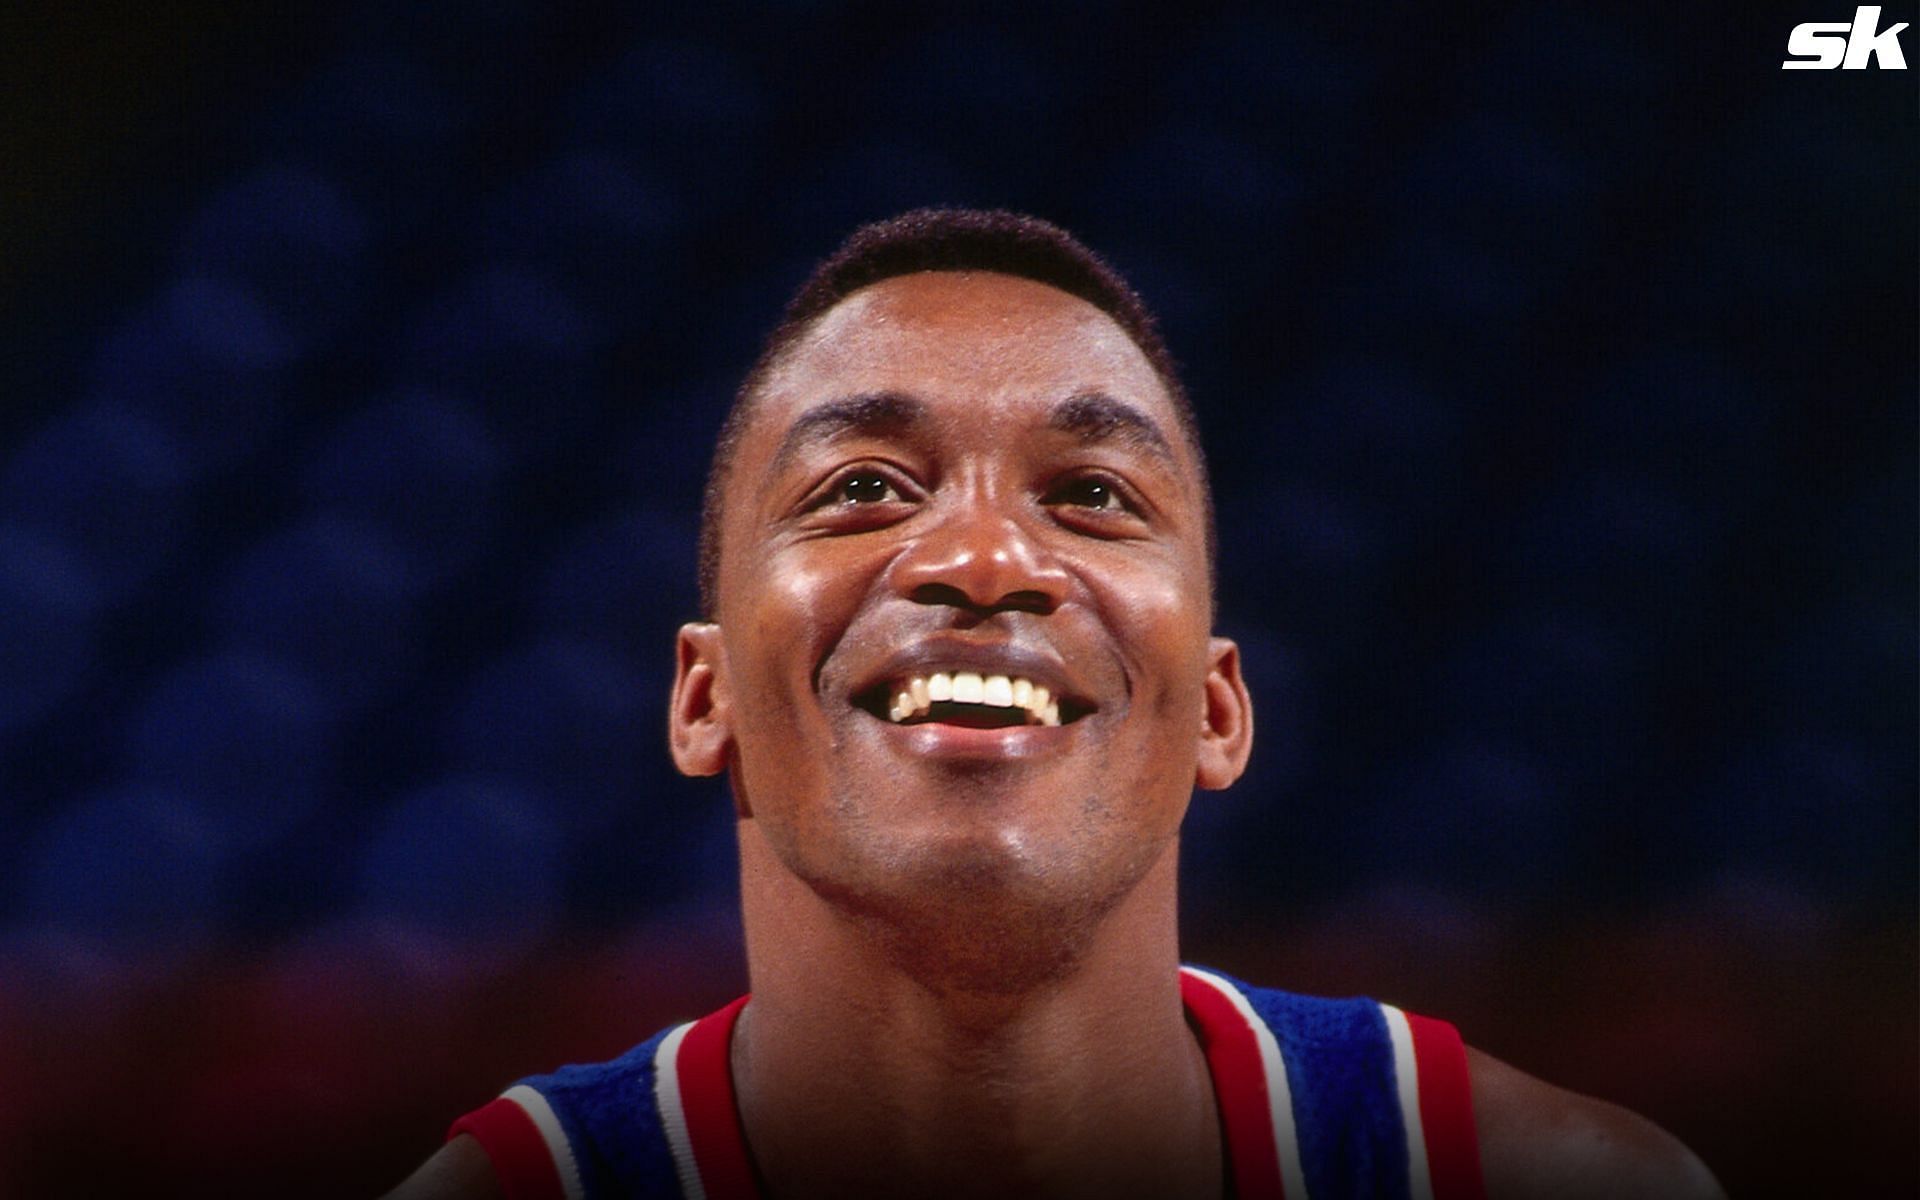 Isiah Thomas is considered one of the greatest point guards of all time.